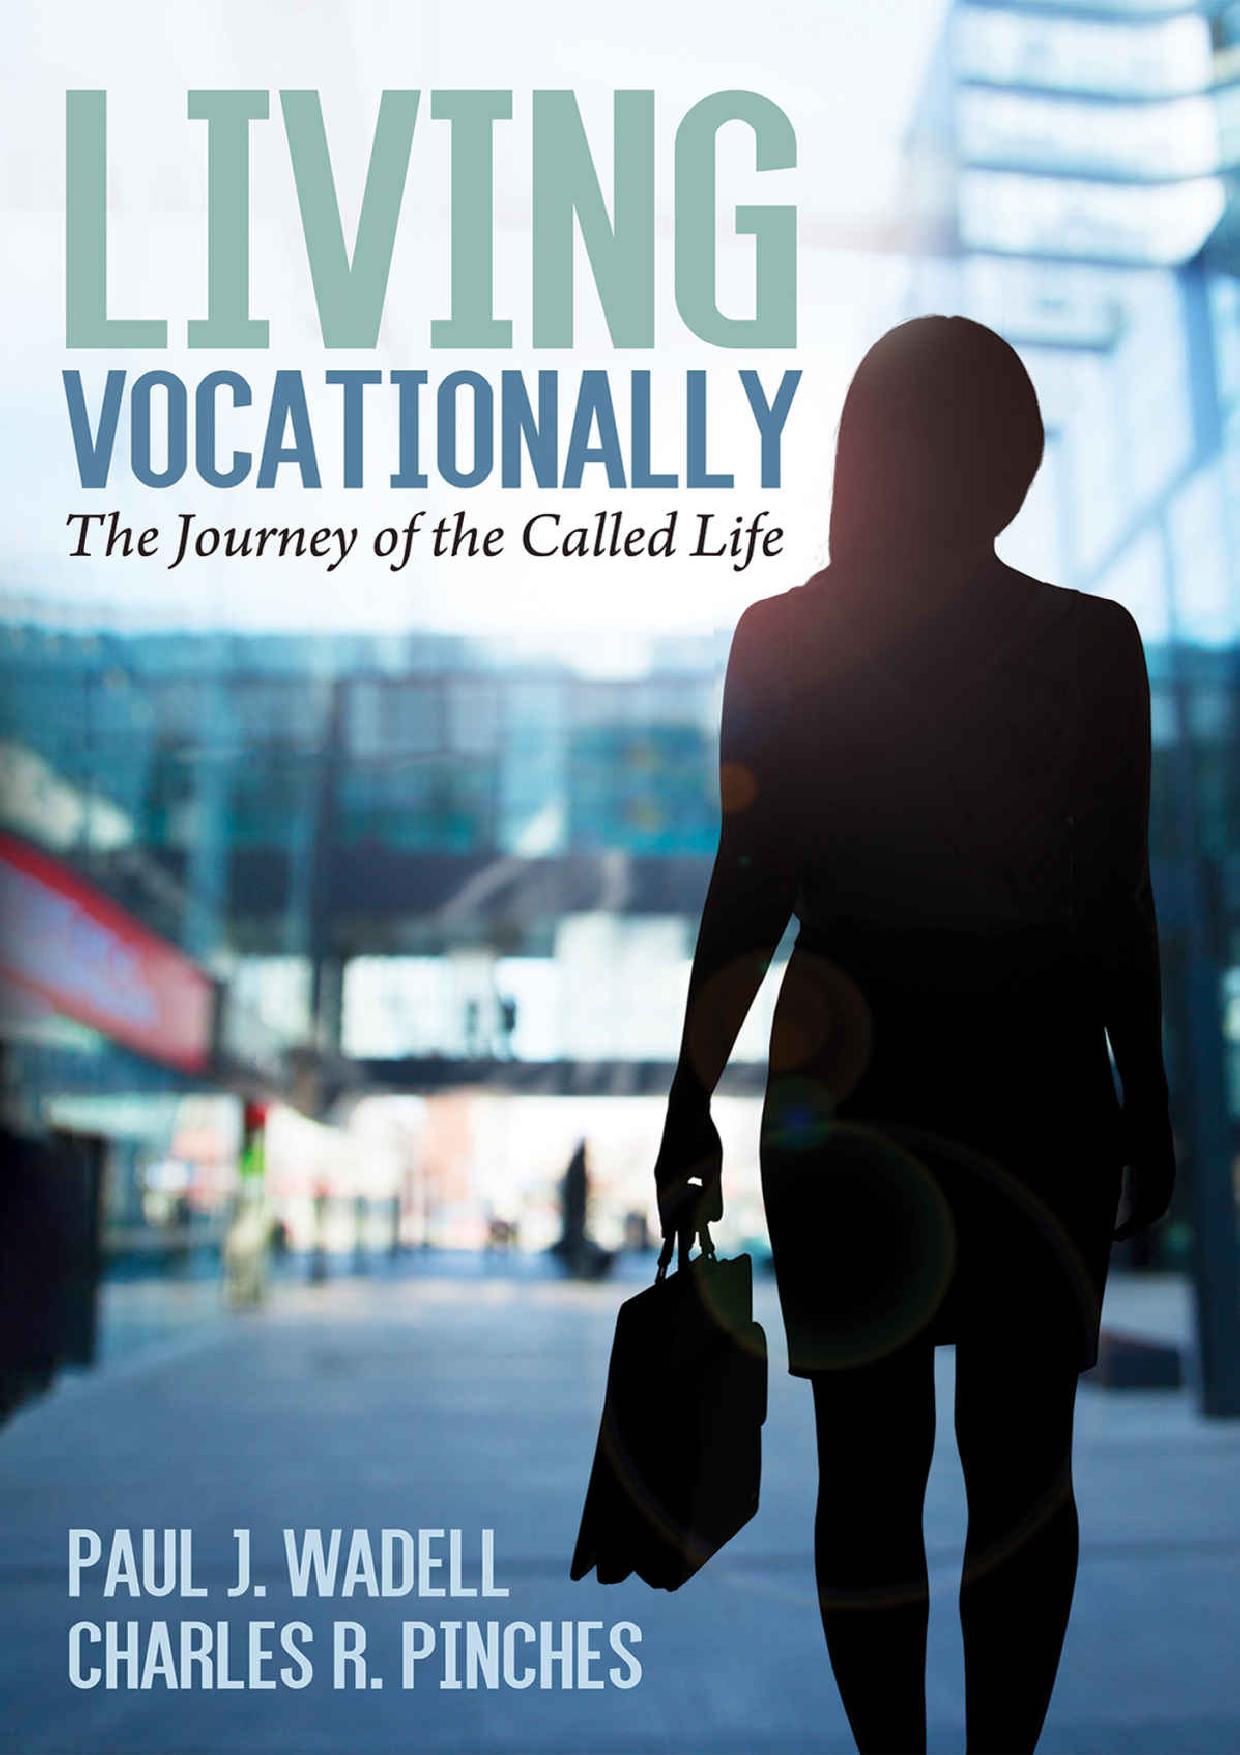 Living Vocationally:The Journey of the Called Life  by  Paul J. Wadell .  Charles R. Pinches